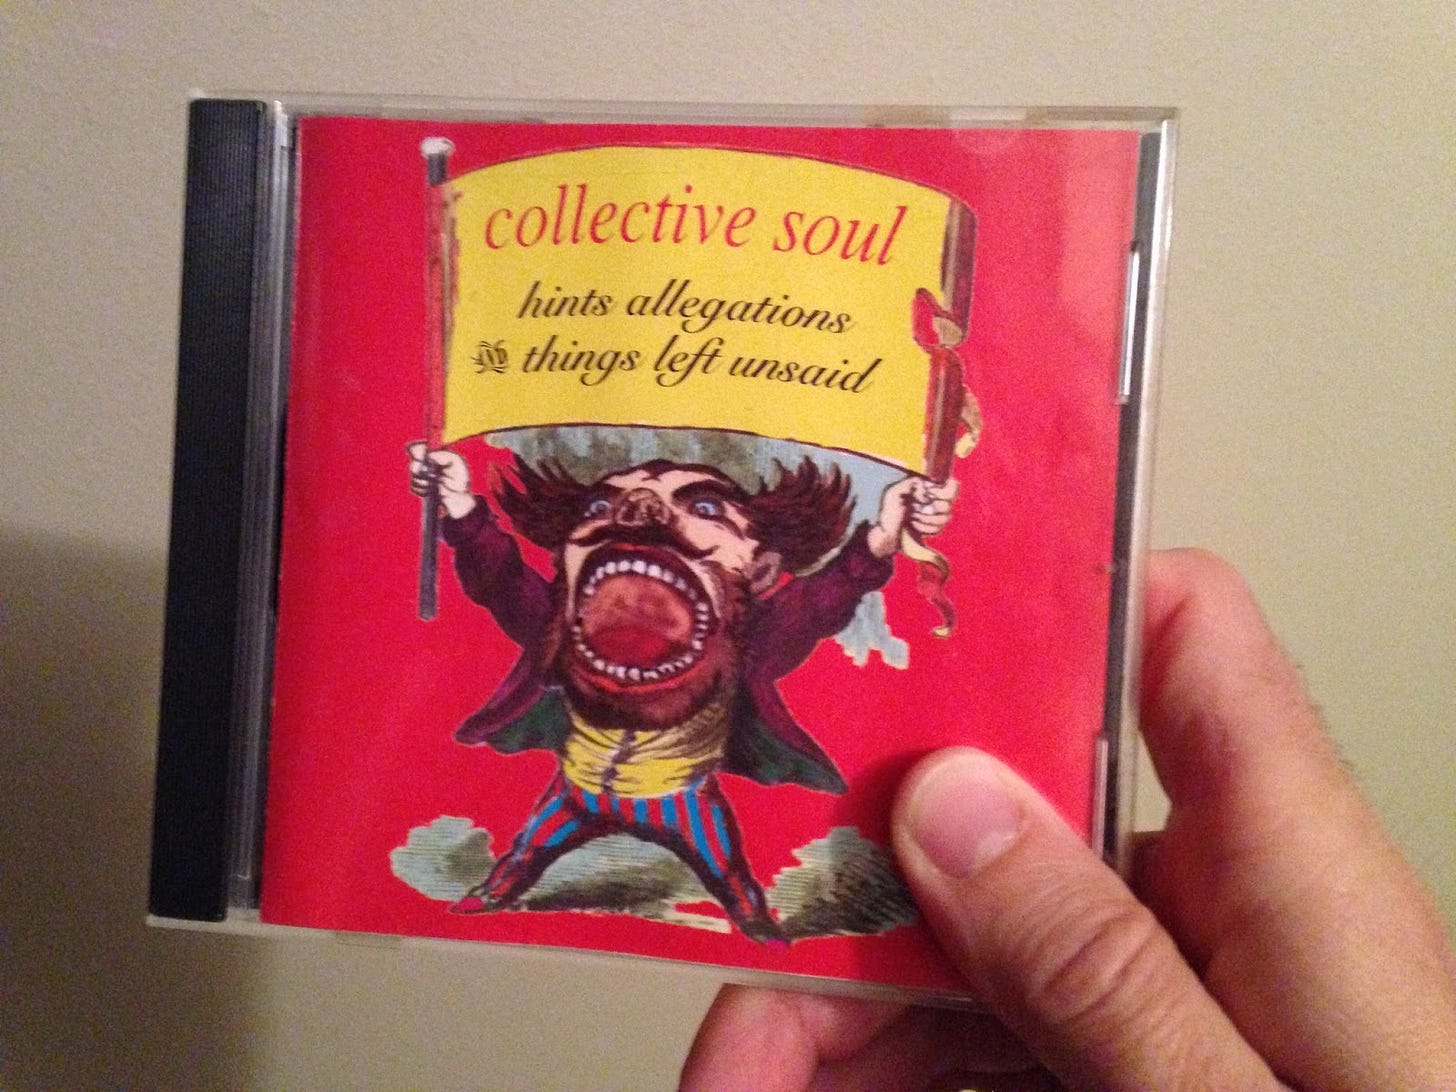 A CD case for Collective Soul's debut album, "hints, allegations, & things left unsaid"